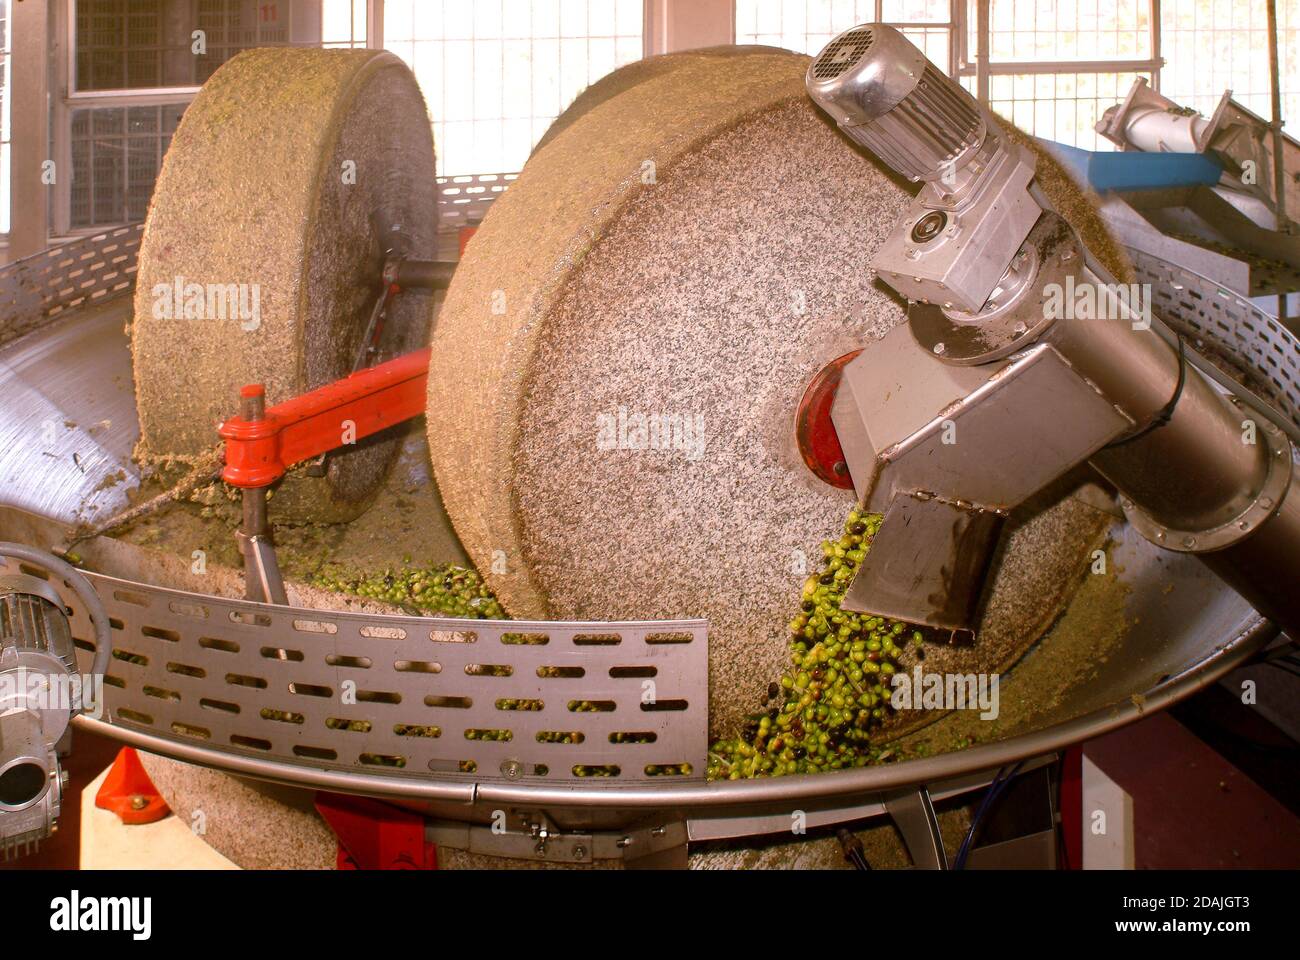 Extraction of extra virgin olive oil from olives by circular stone mill in Italy Stock Photo